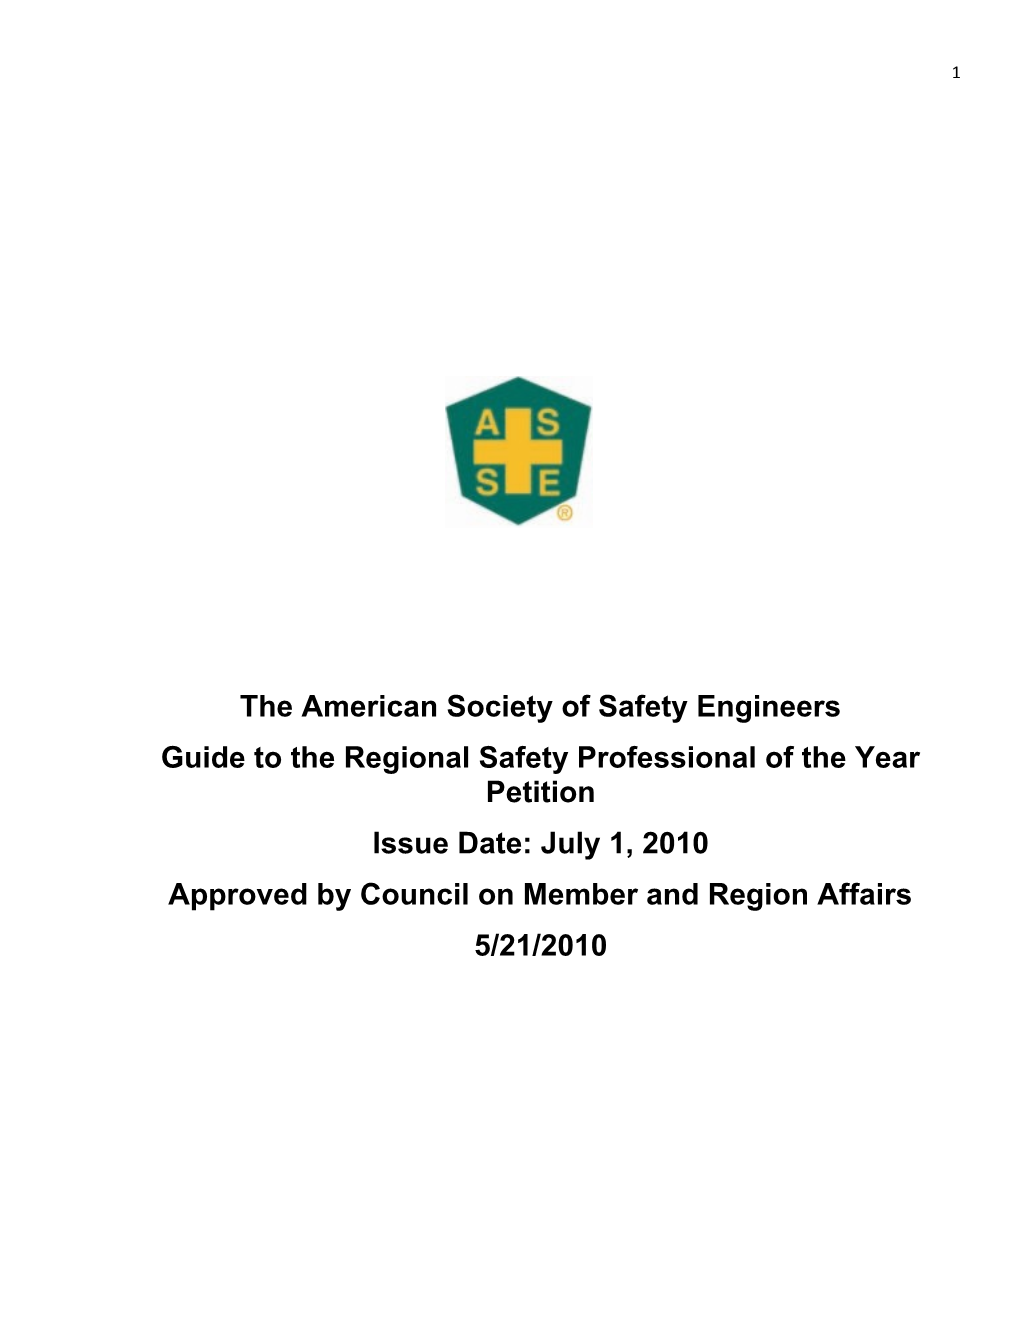 Guide to the Regional Safety Professional of the Year Petition